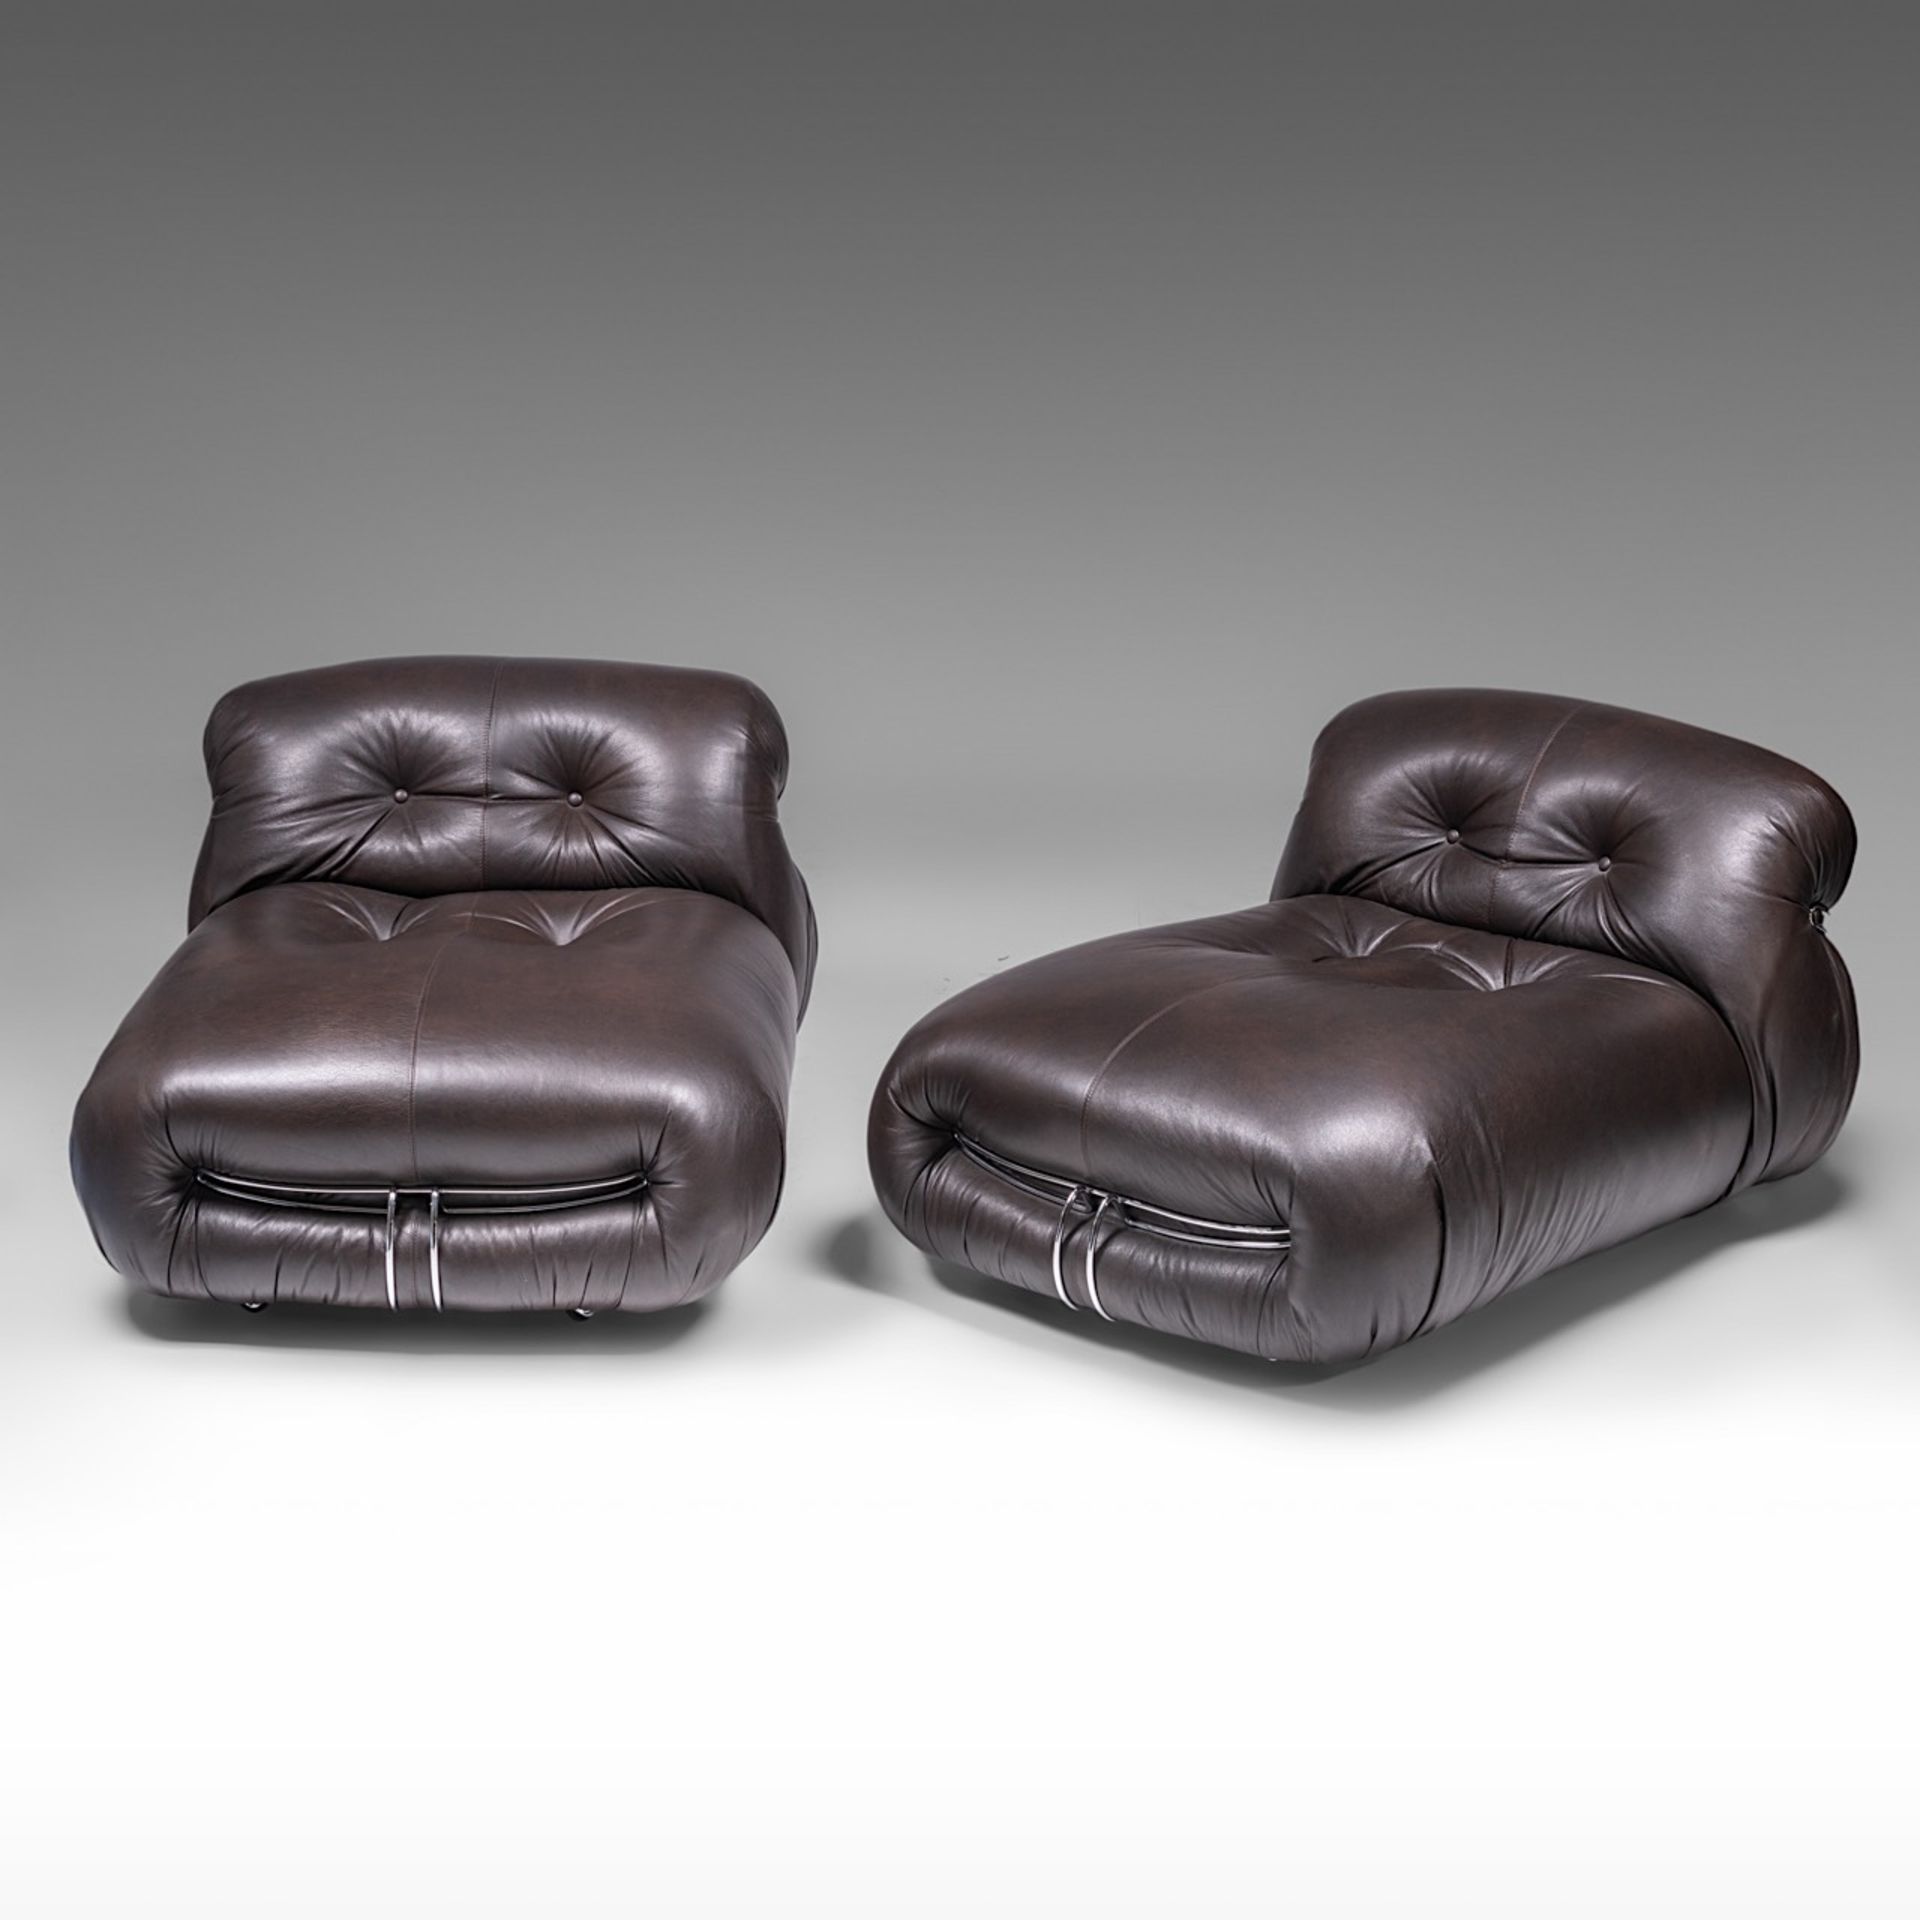 Two Soriana chaise-longues in brown leather and chrome by Afra & Tobia Scarpa for Cassina